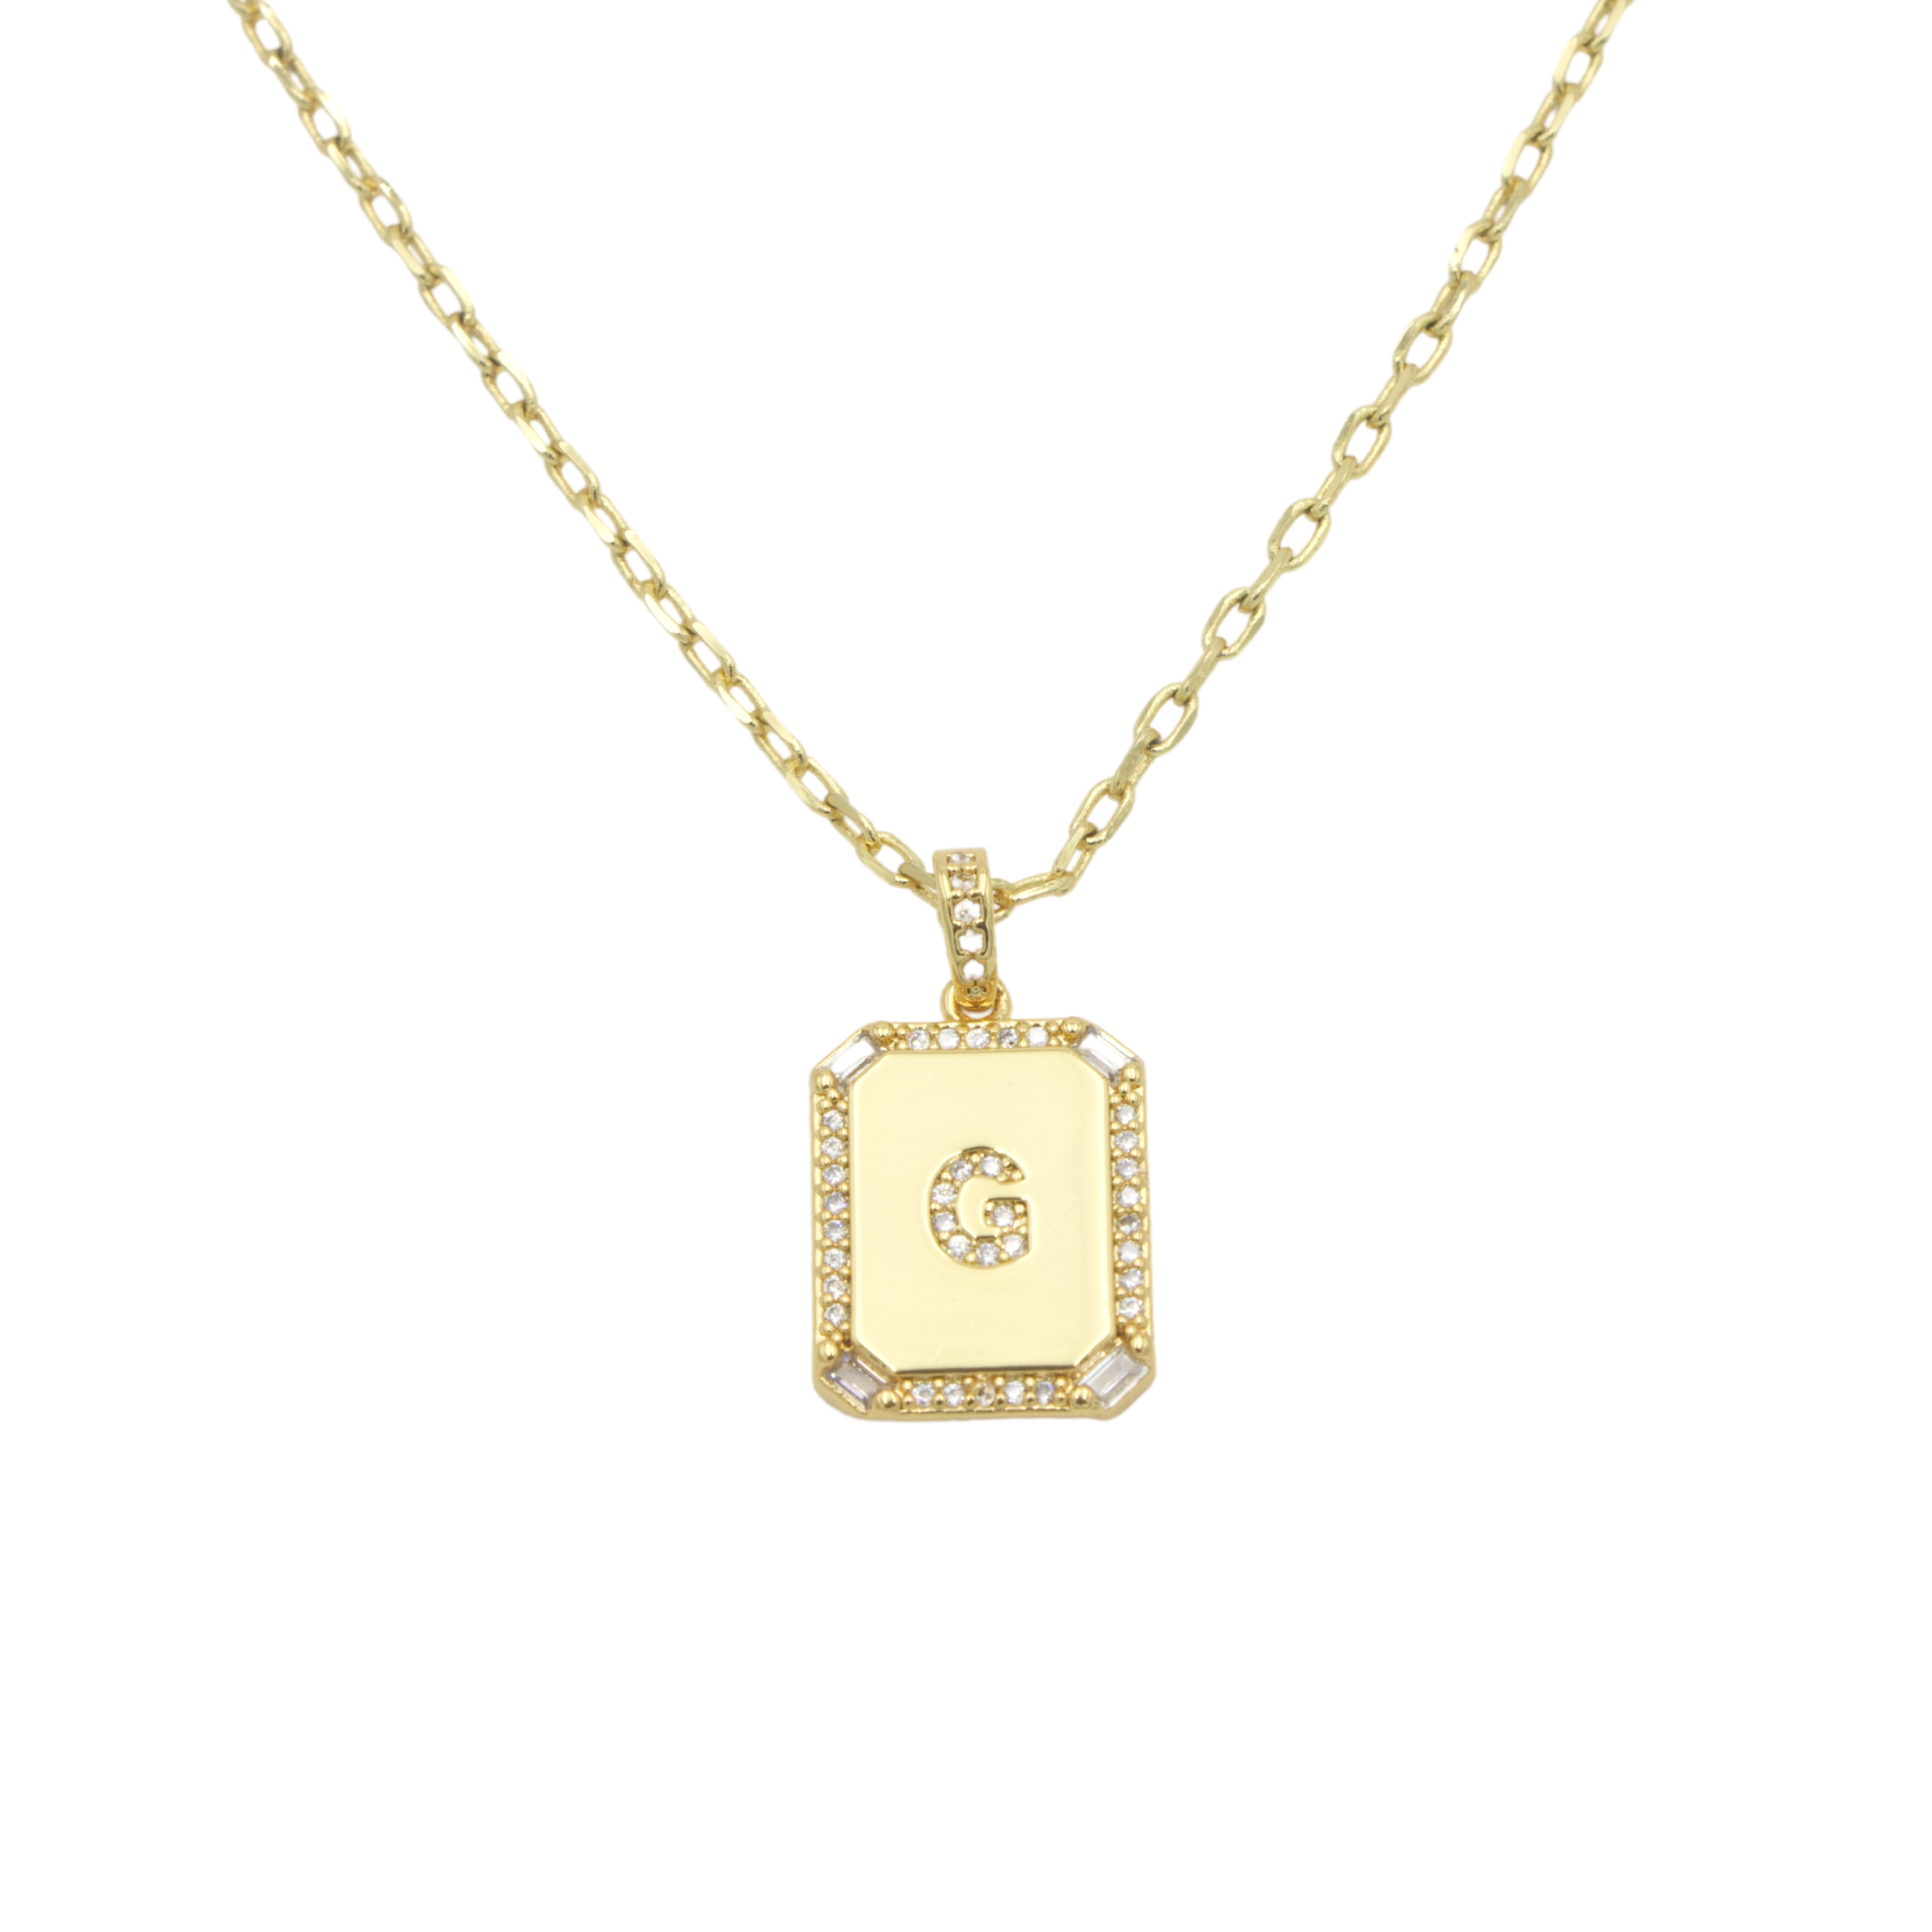 AW Boutique's gold filled 16 inch cable chain necklace finished with a dainty initial pendant with cubic zirconia detail. G initial shown.